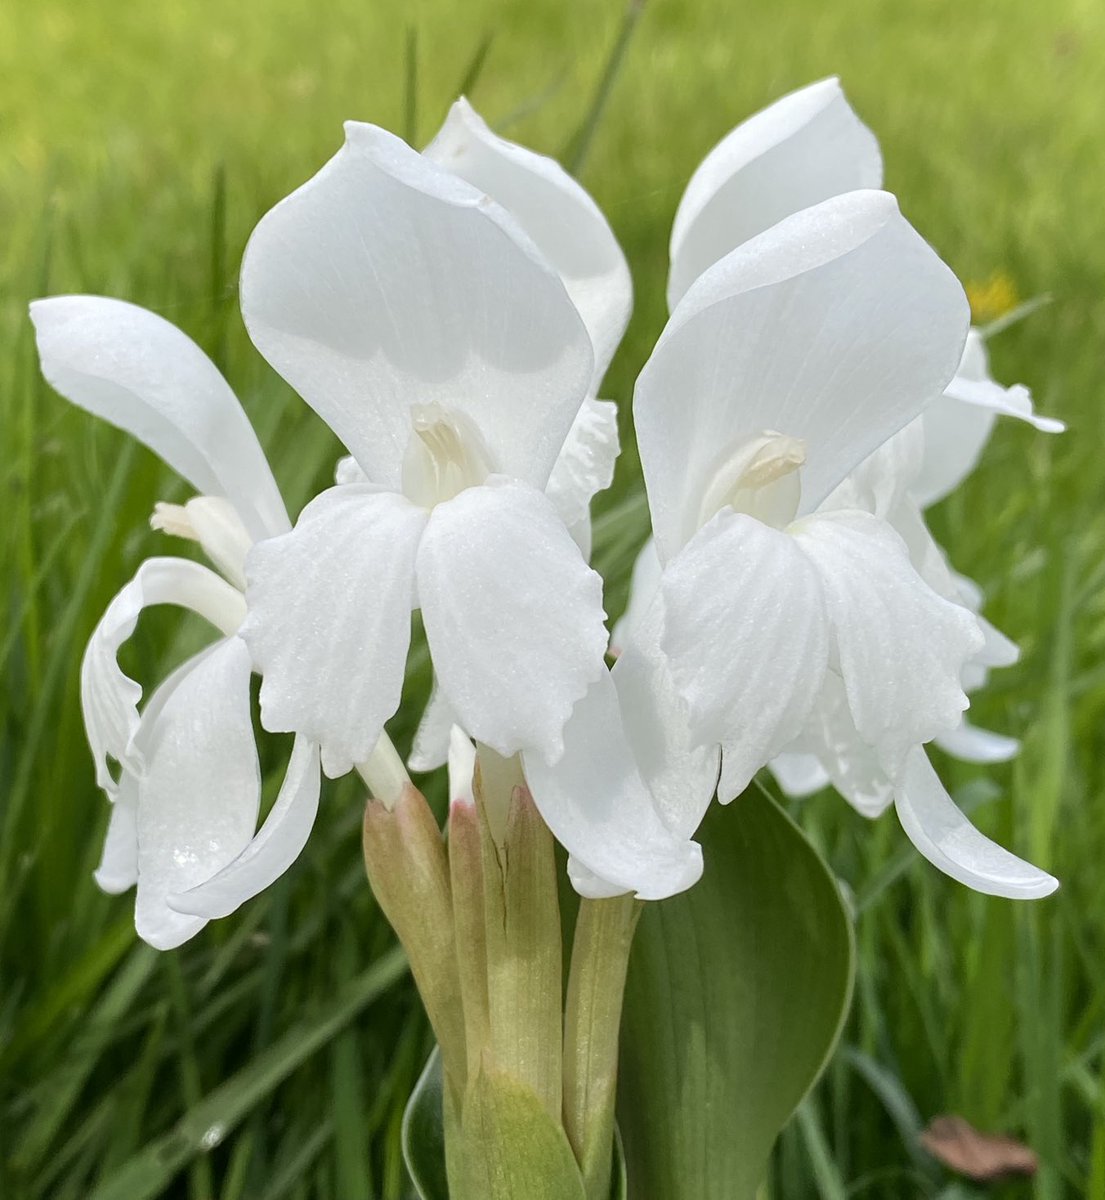 Roscoea humeana alba, no words can add to its beauty.